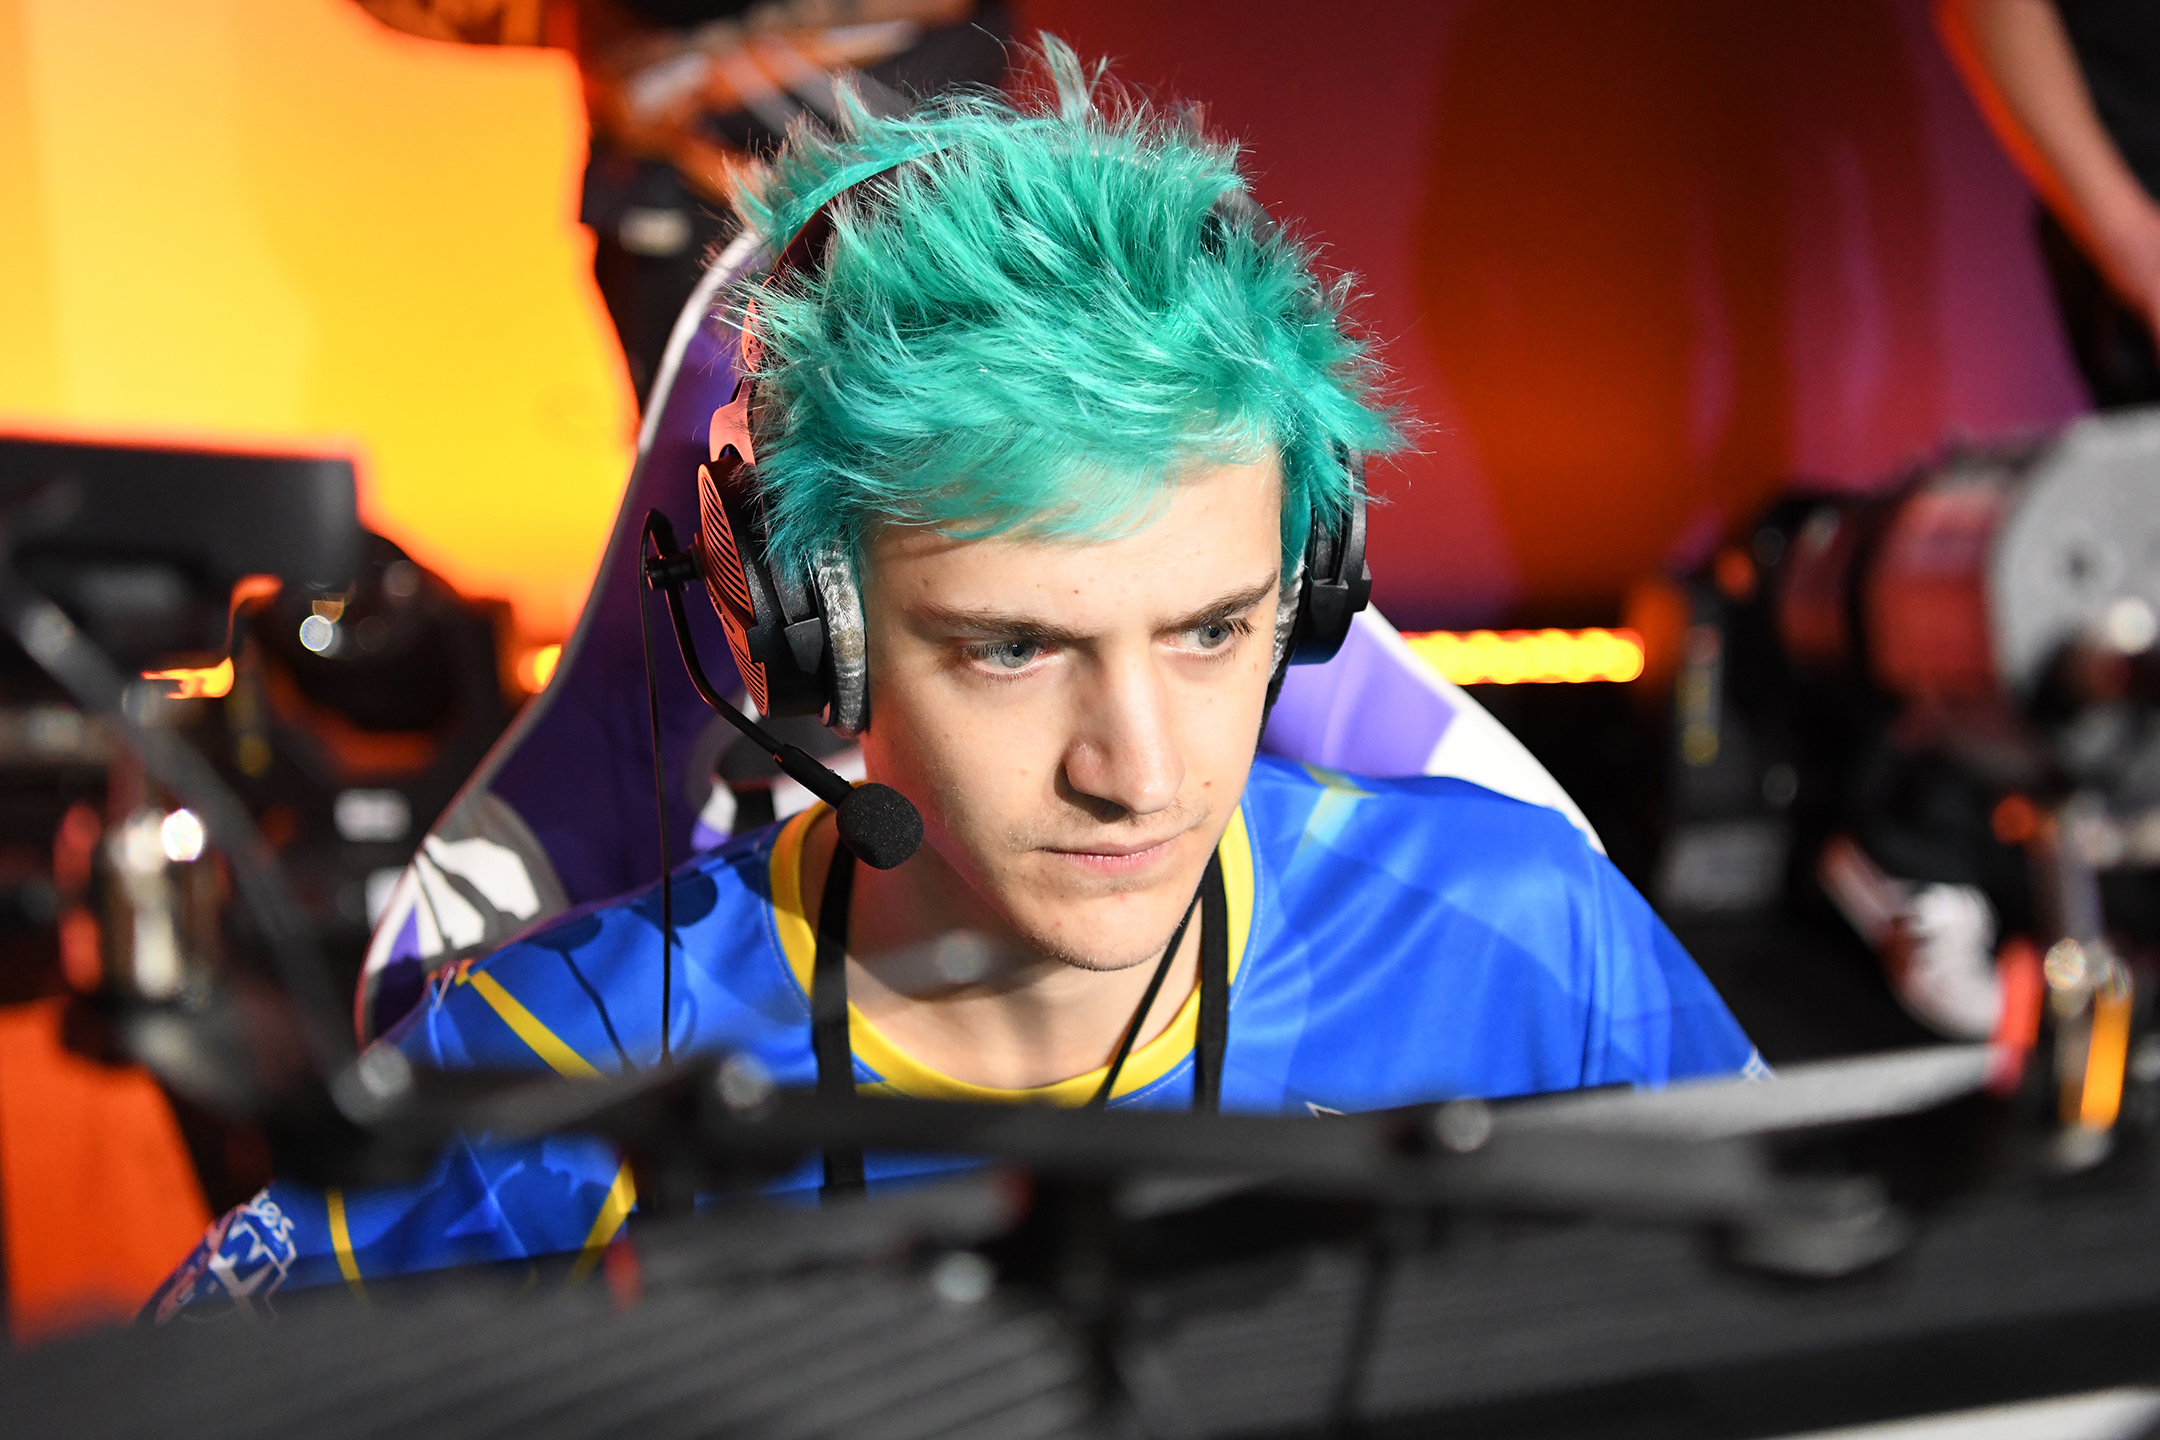 The professional gamer Tyler "Ninja" Blevins sits at a computer as he plays a game in competition